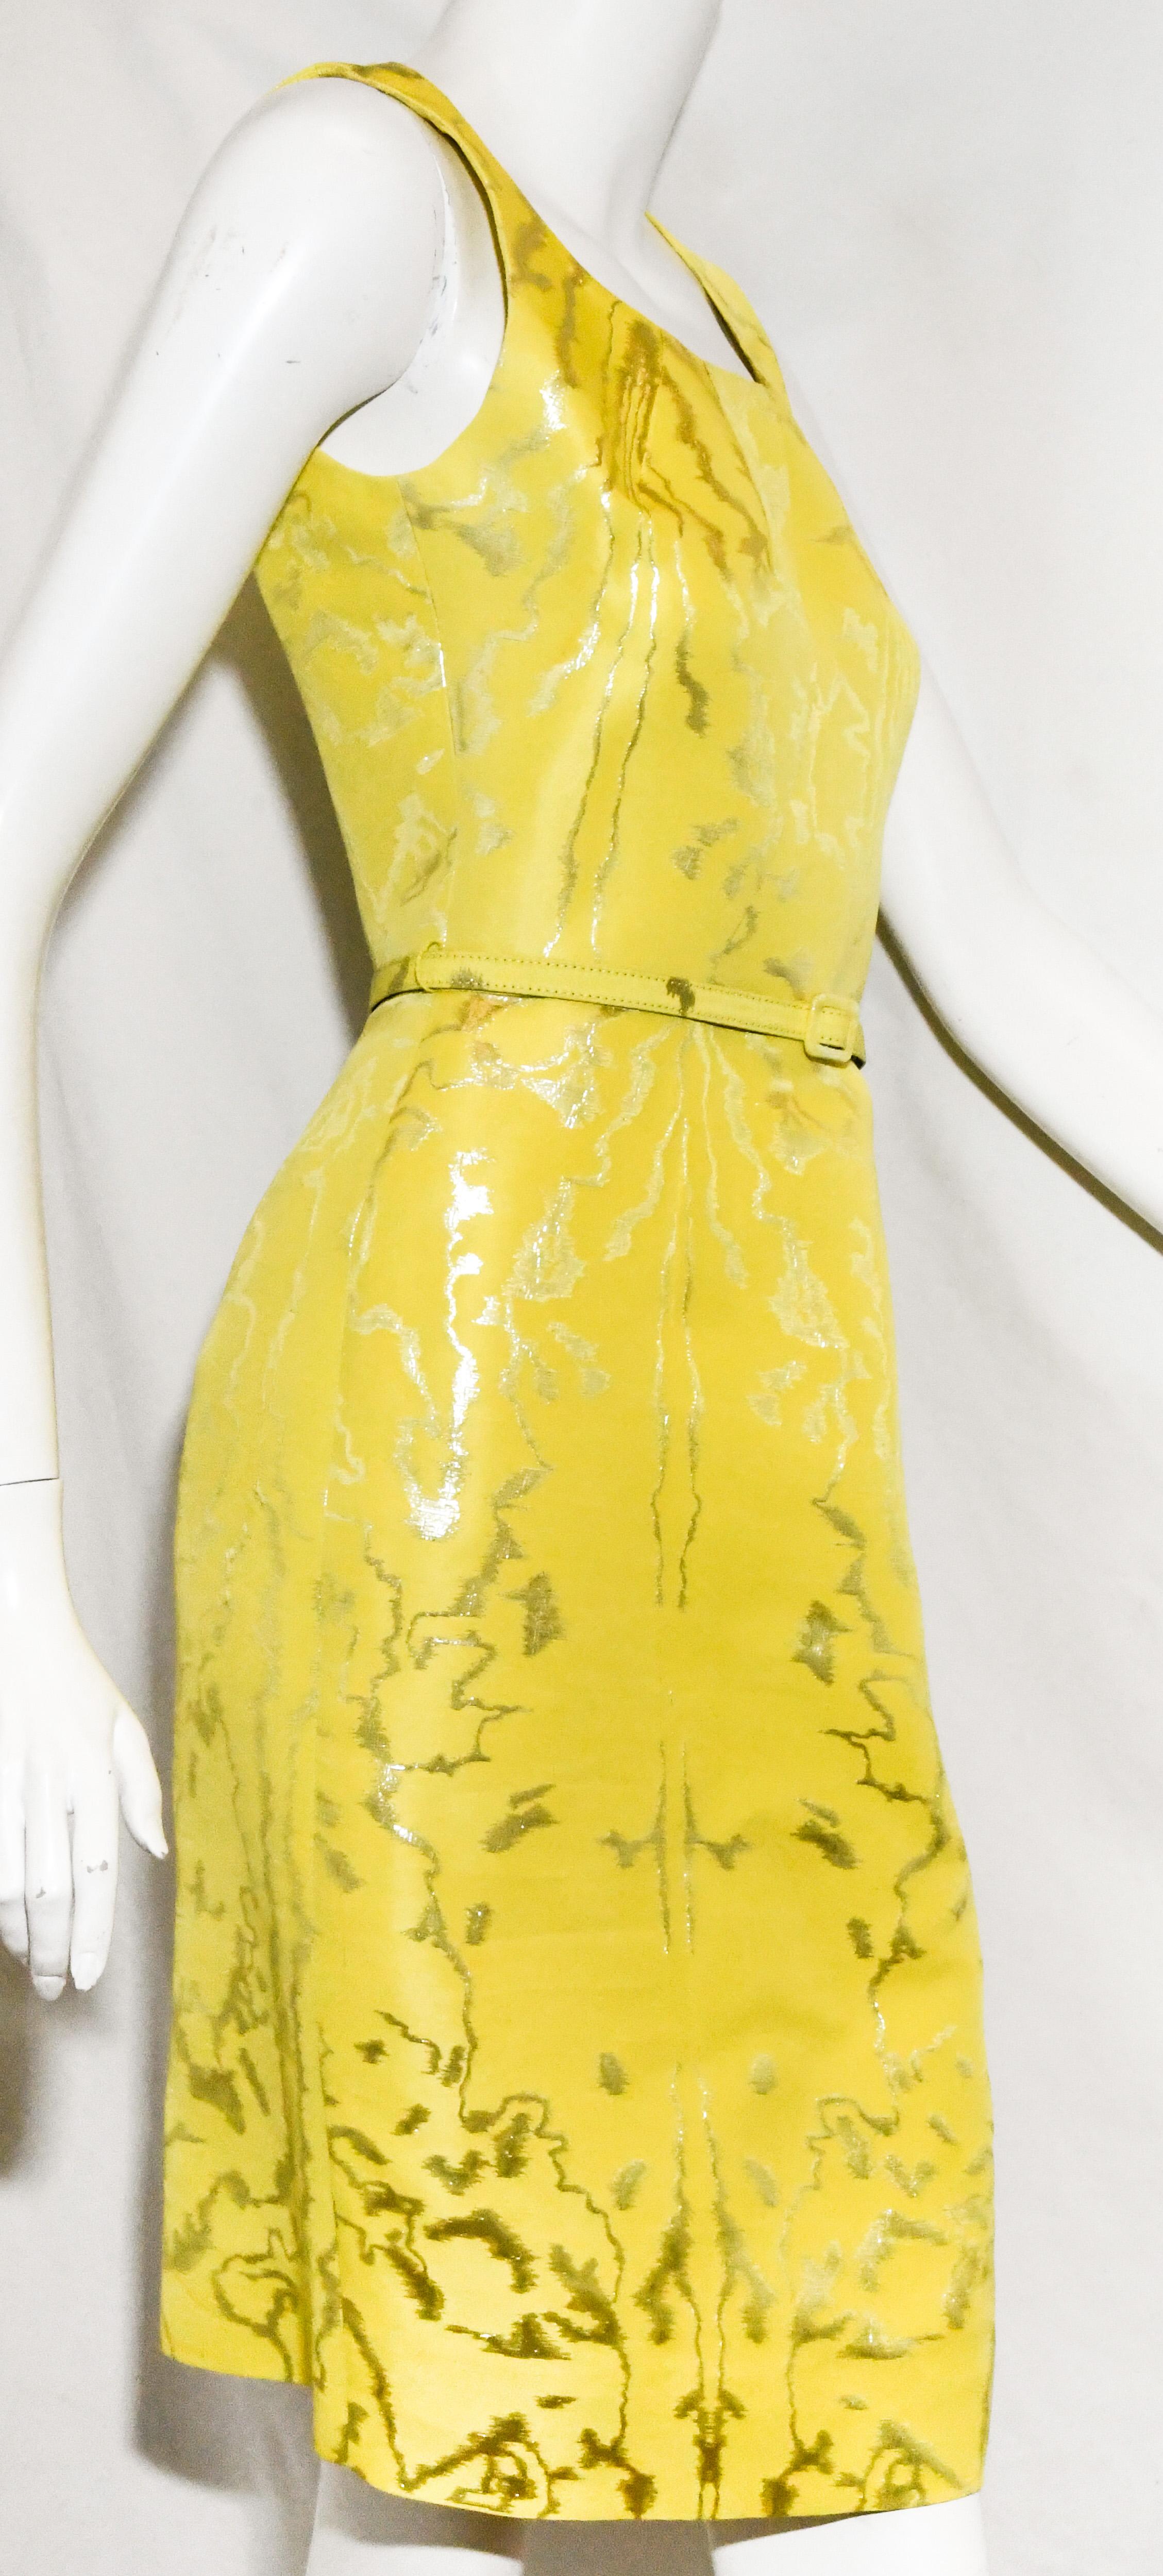 Oscar de la Renta lemon brocade textured cocktail dress incorporates metallic silver thick threads throughout. 
With a square scoop neck this abstract brocade print dress includes a thin covered belt.  At the back, a long zipper and a small vent at